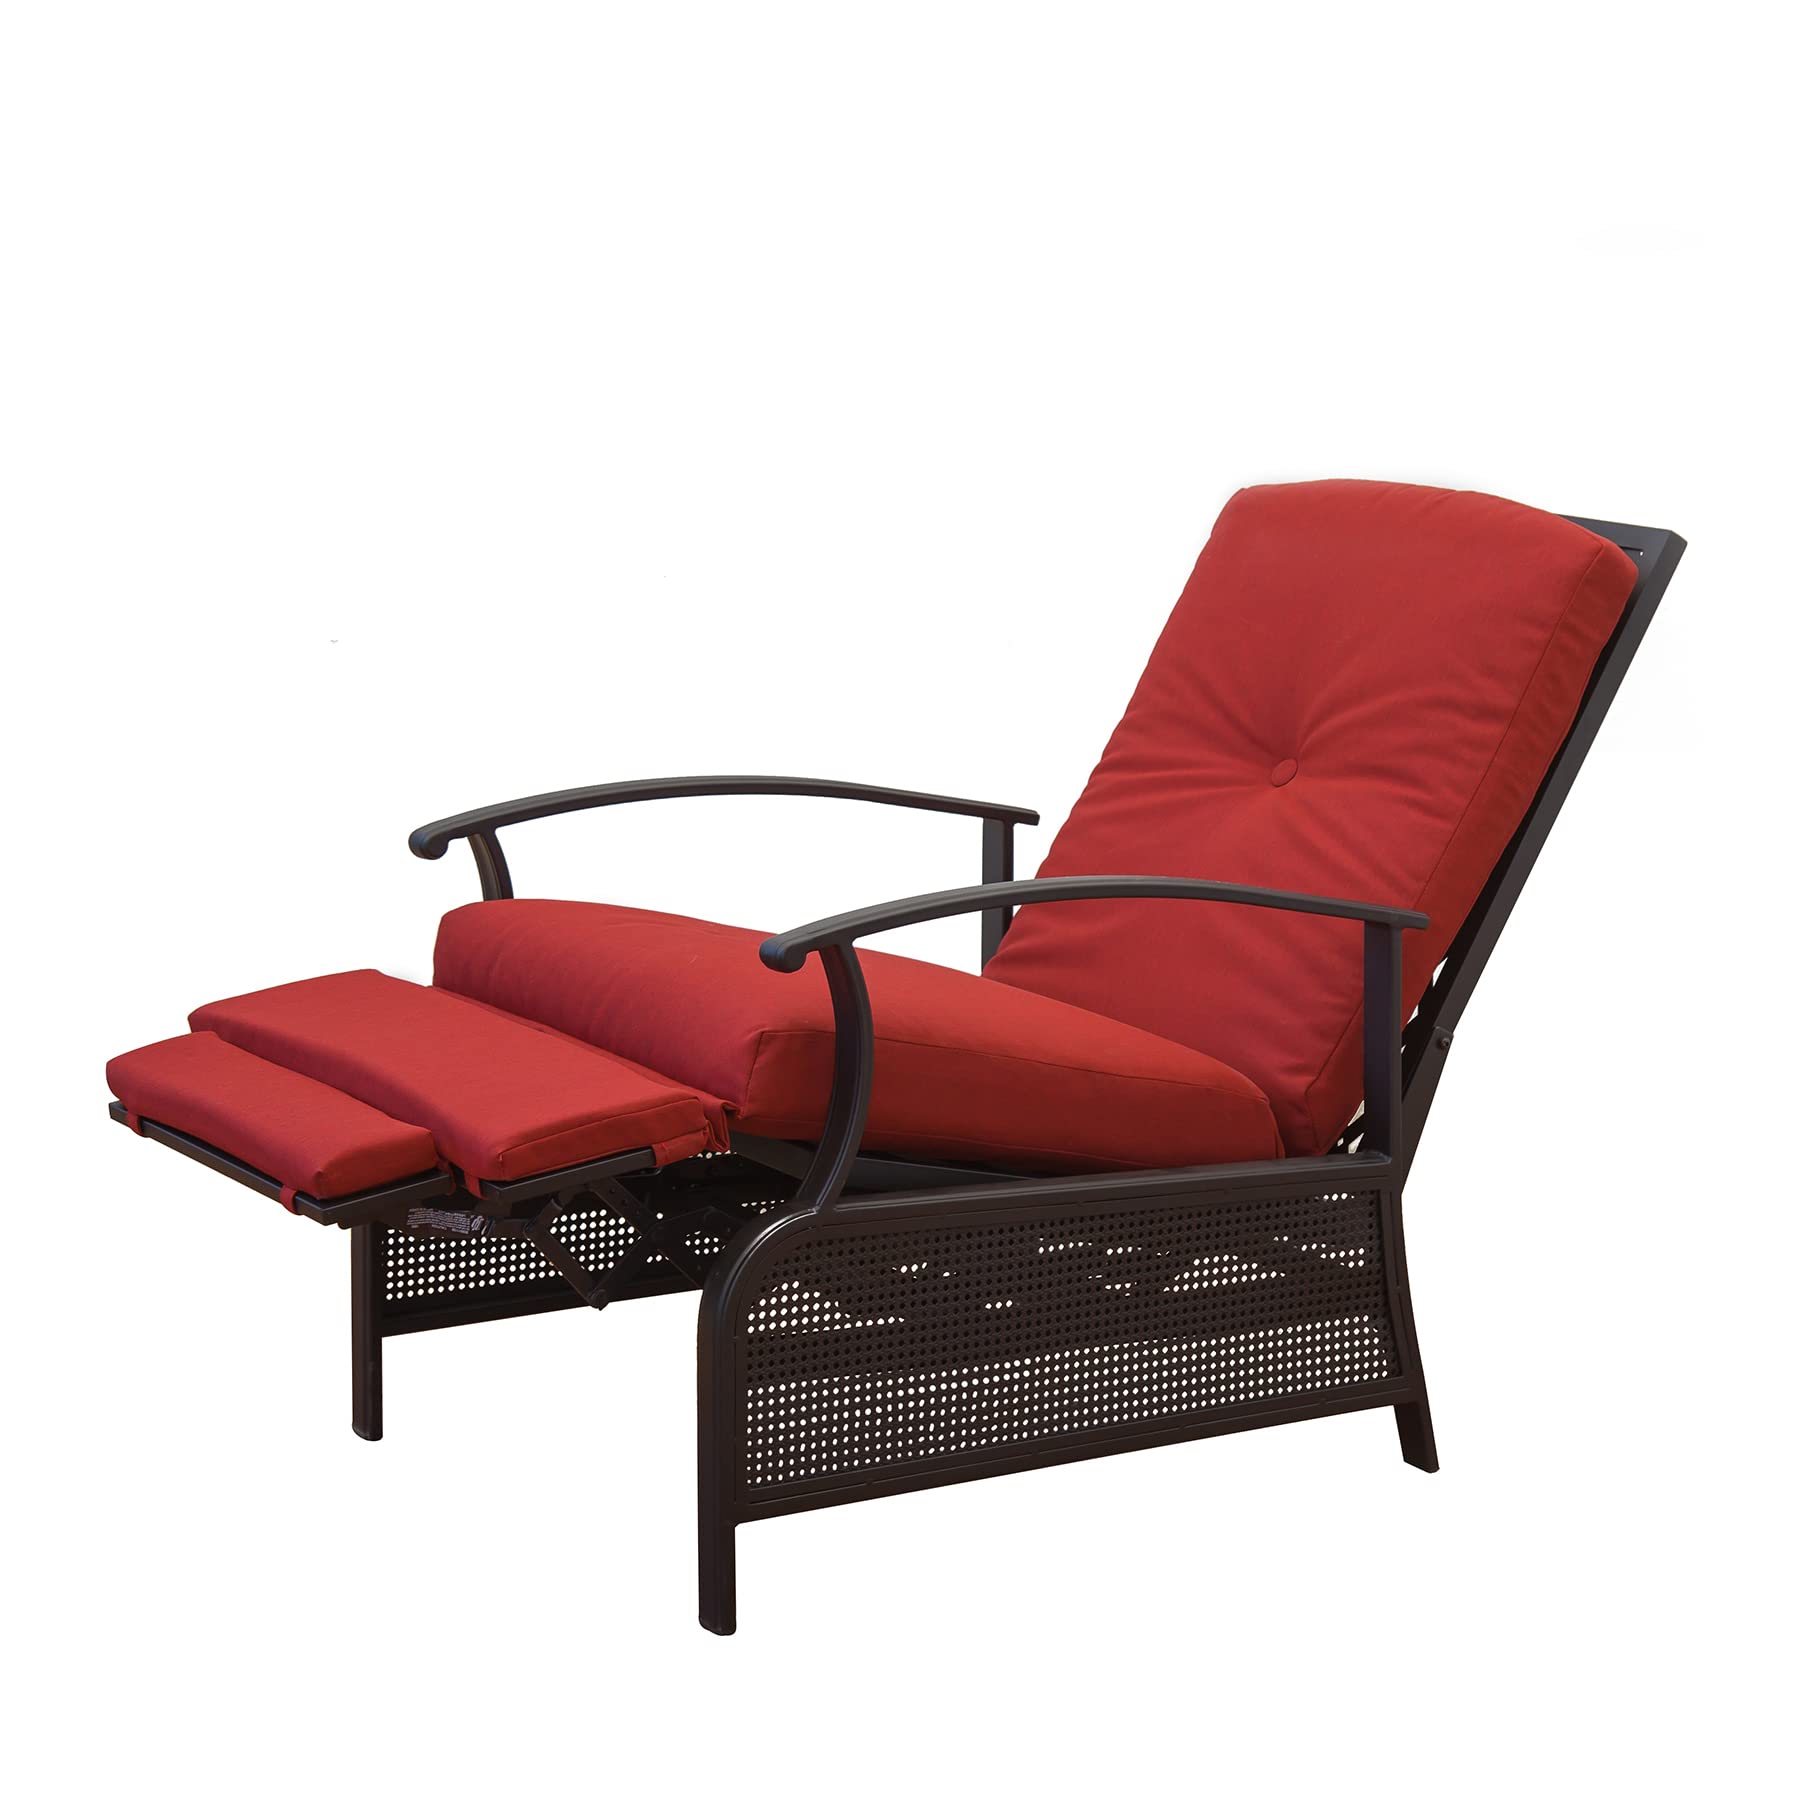 Domi Outdoor Living Adjustable Recliner Chair, Metal Reclining Lounge Chair, Remova Patio Chair - image 1 of 7